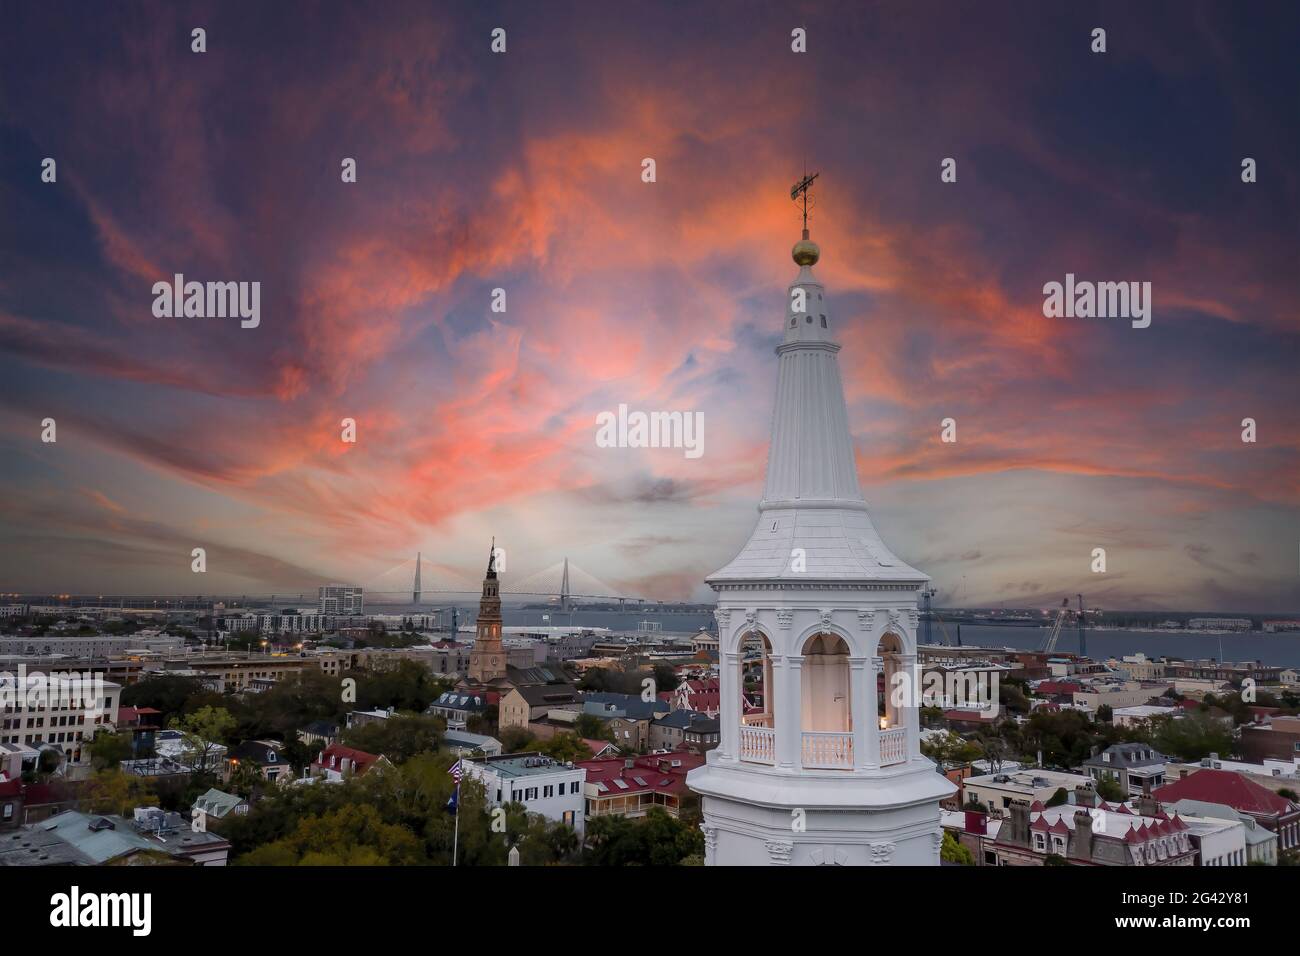 Personal Drone In Action In The City Of Charleston, SC Stock Photo